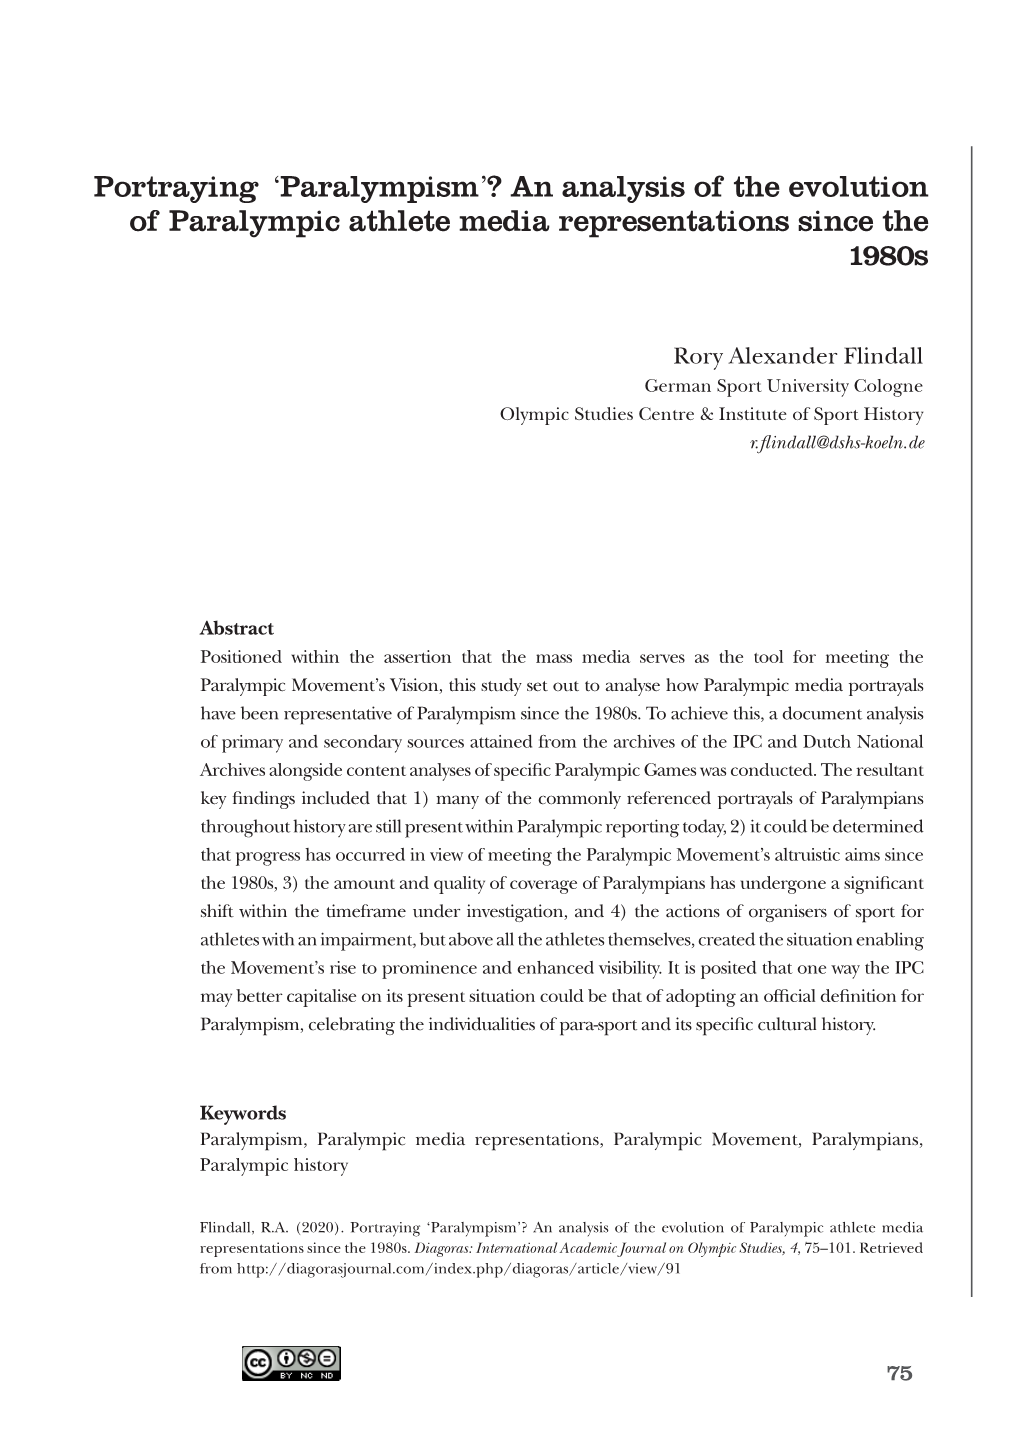 An Analysis of the Evolution of Paralympic Athlete Media Representations Since the 1980S